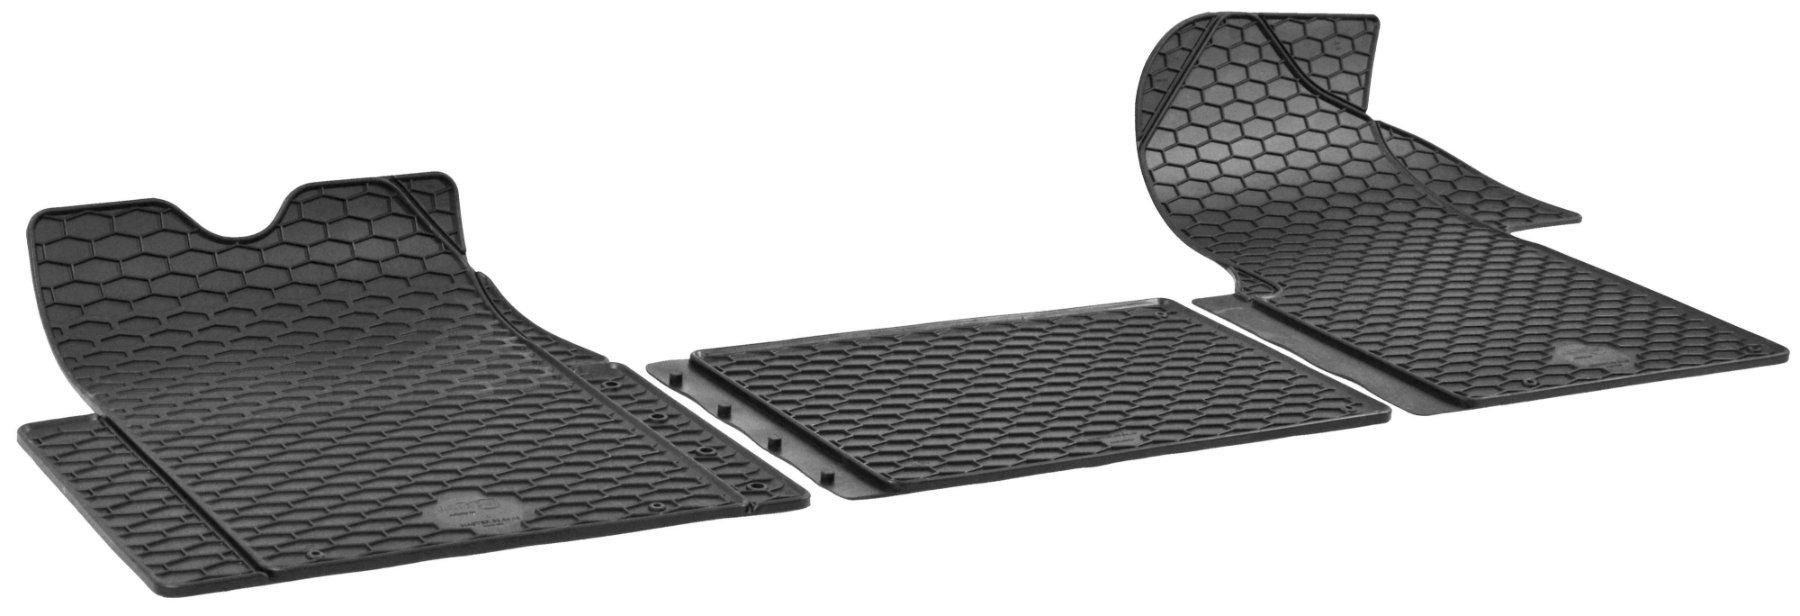 Rubber mats RubberLine for Renault Master II 1998-Today, Opel Movano 1998-Today, Nissan NV400 2011-Today